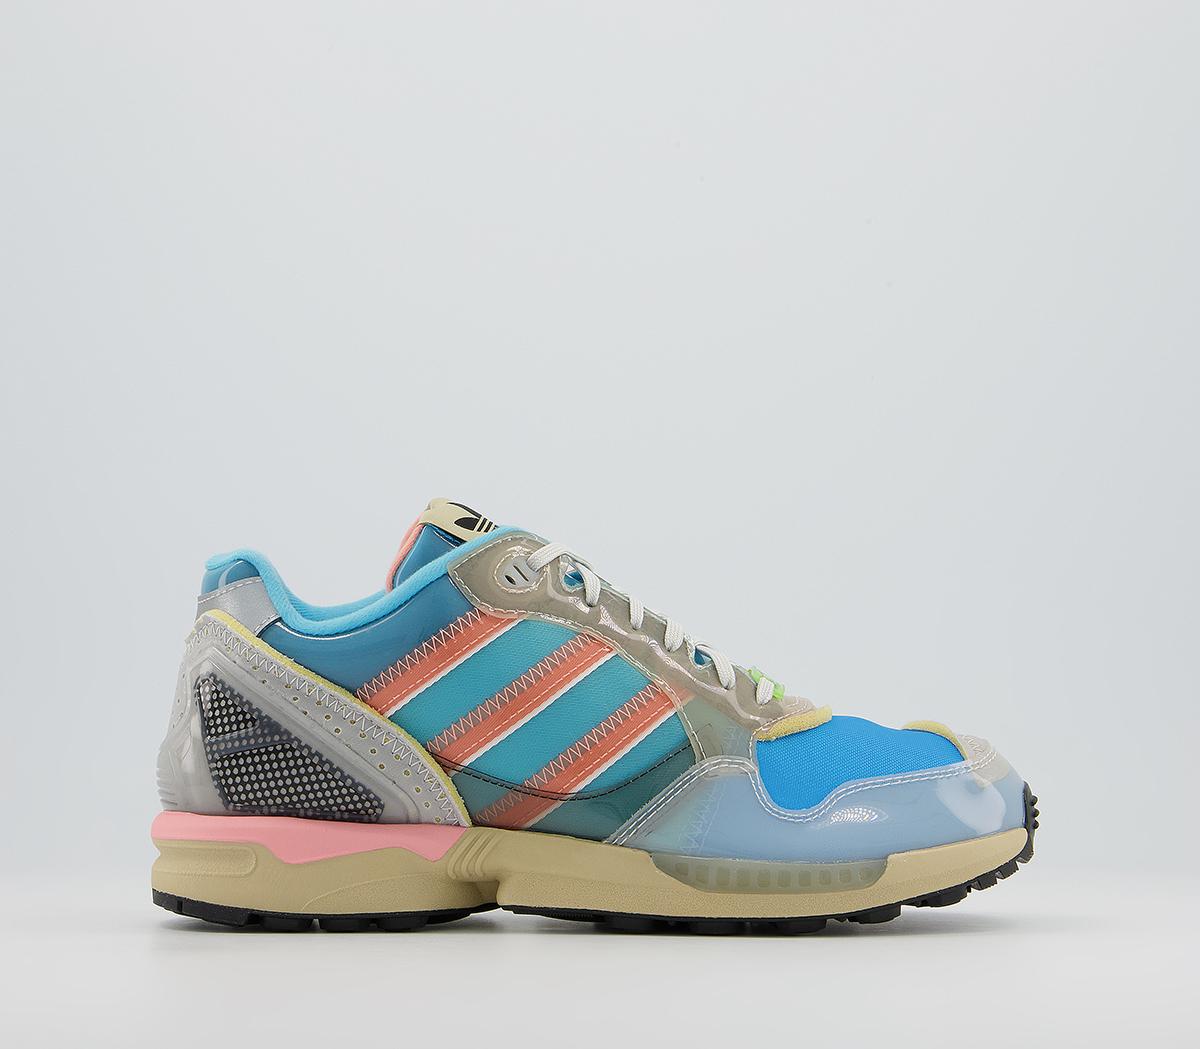 adidas Xz0006 Inside Out Trainers Bright Cyan Chalk Coral - adidas ZX